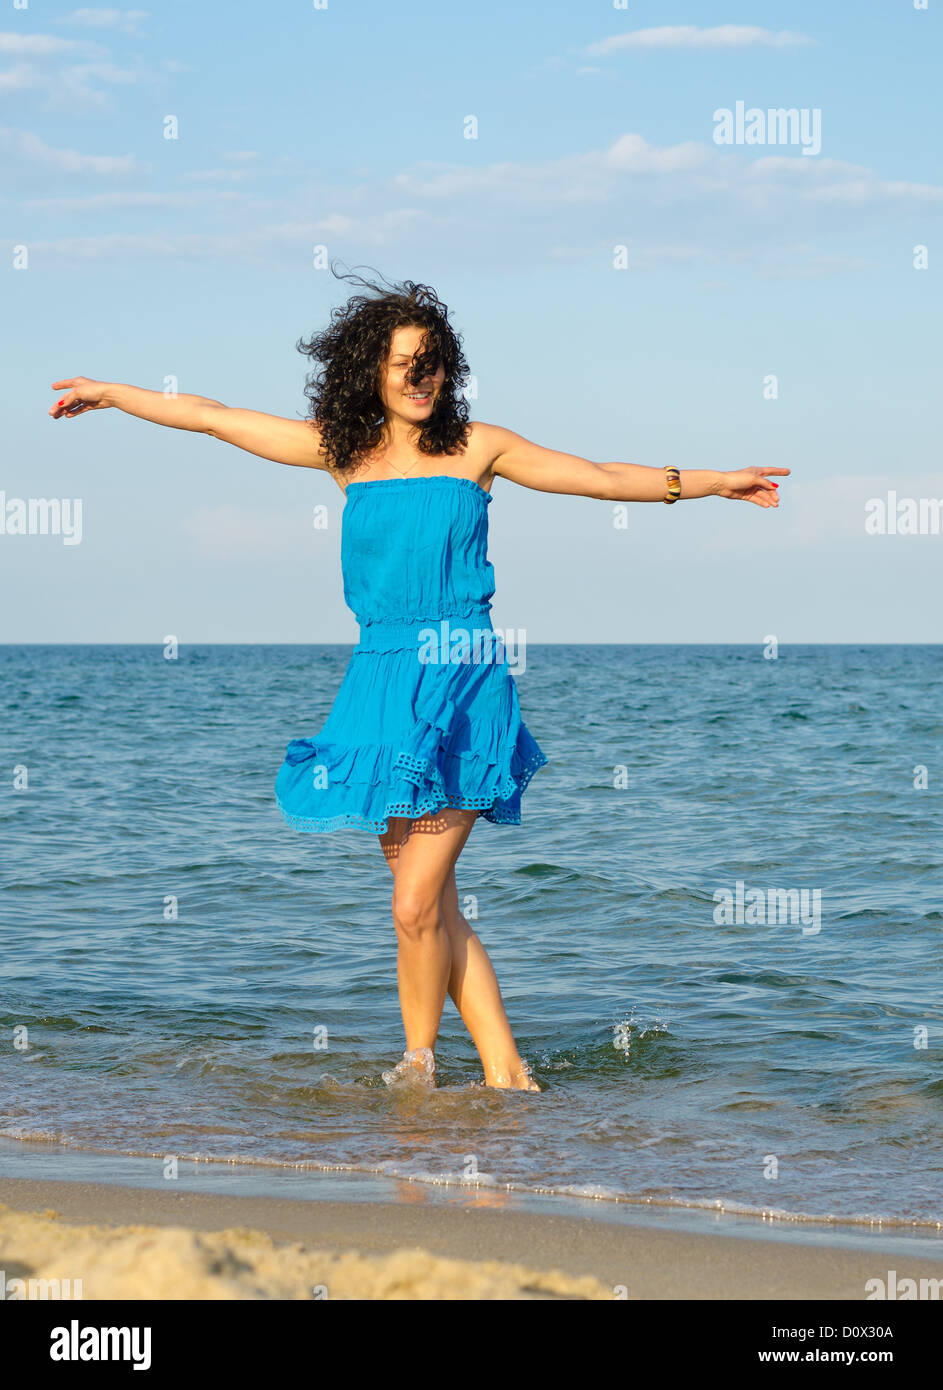 Woman in a blue summer dress dancing in the shallow sea with her arms outspread enjoying the freedom of a summer vacation Stock Photo